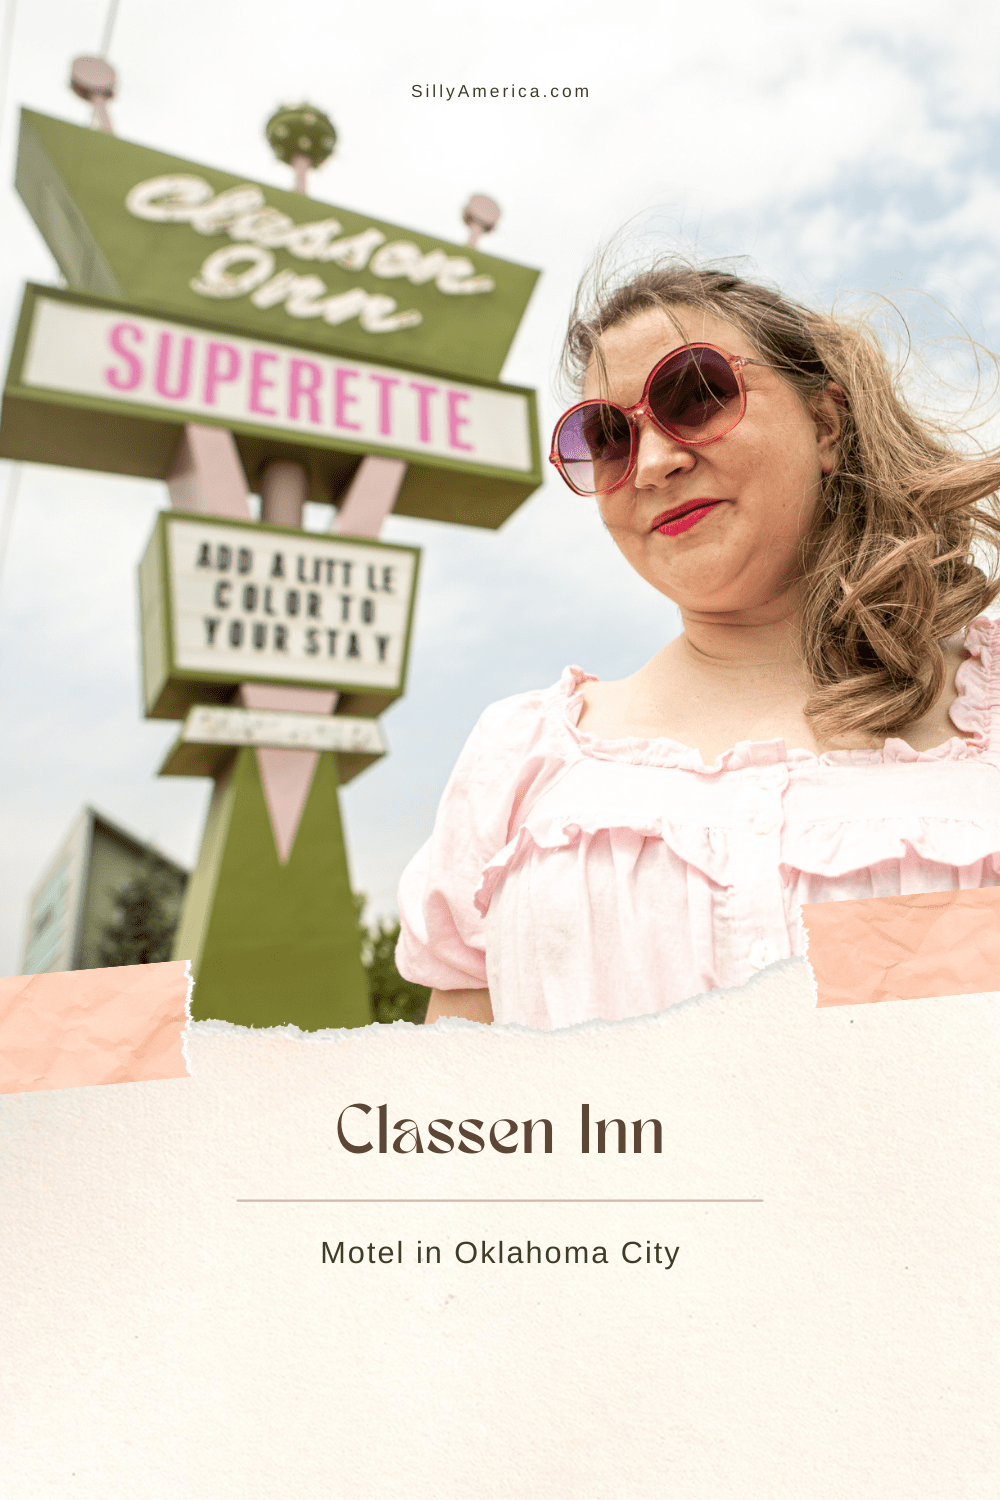 If you’re looking for a unique hotel in Oklahoma City that combines vintage charge, modern amenities, and plenty of Instagram-worthy moments, you’ve got to spend the night here: The Classen Inn in Oklahoma City. It's a fun retro motel to spend the night on your Oklahoma City vacation or Route 66 road trip in Oklahoma and beyond. #Oklahoma #OklahomaCity #Motel #Hotel #Route66 #Route66RoadTrip #Route66Hotel